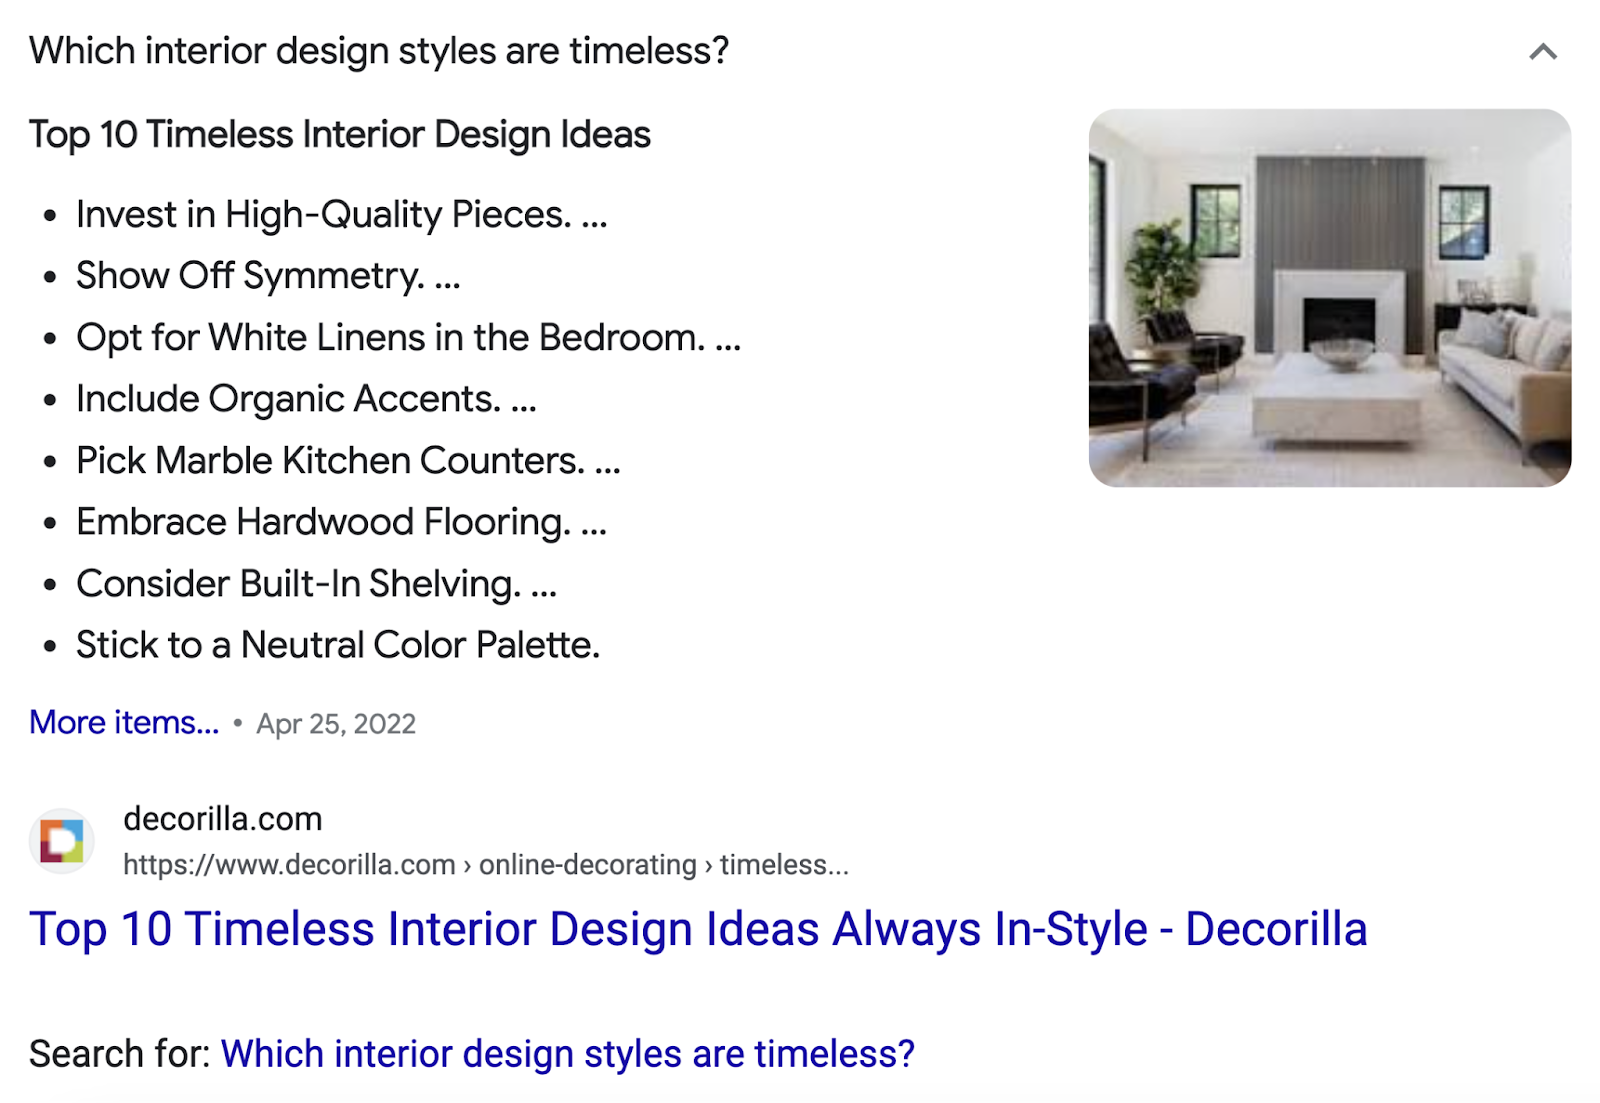 A featured snippet for “Which interior design styles are timeless?”